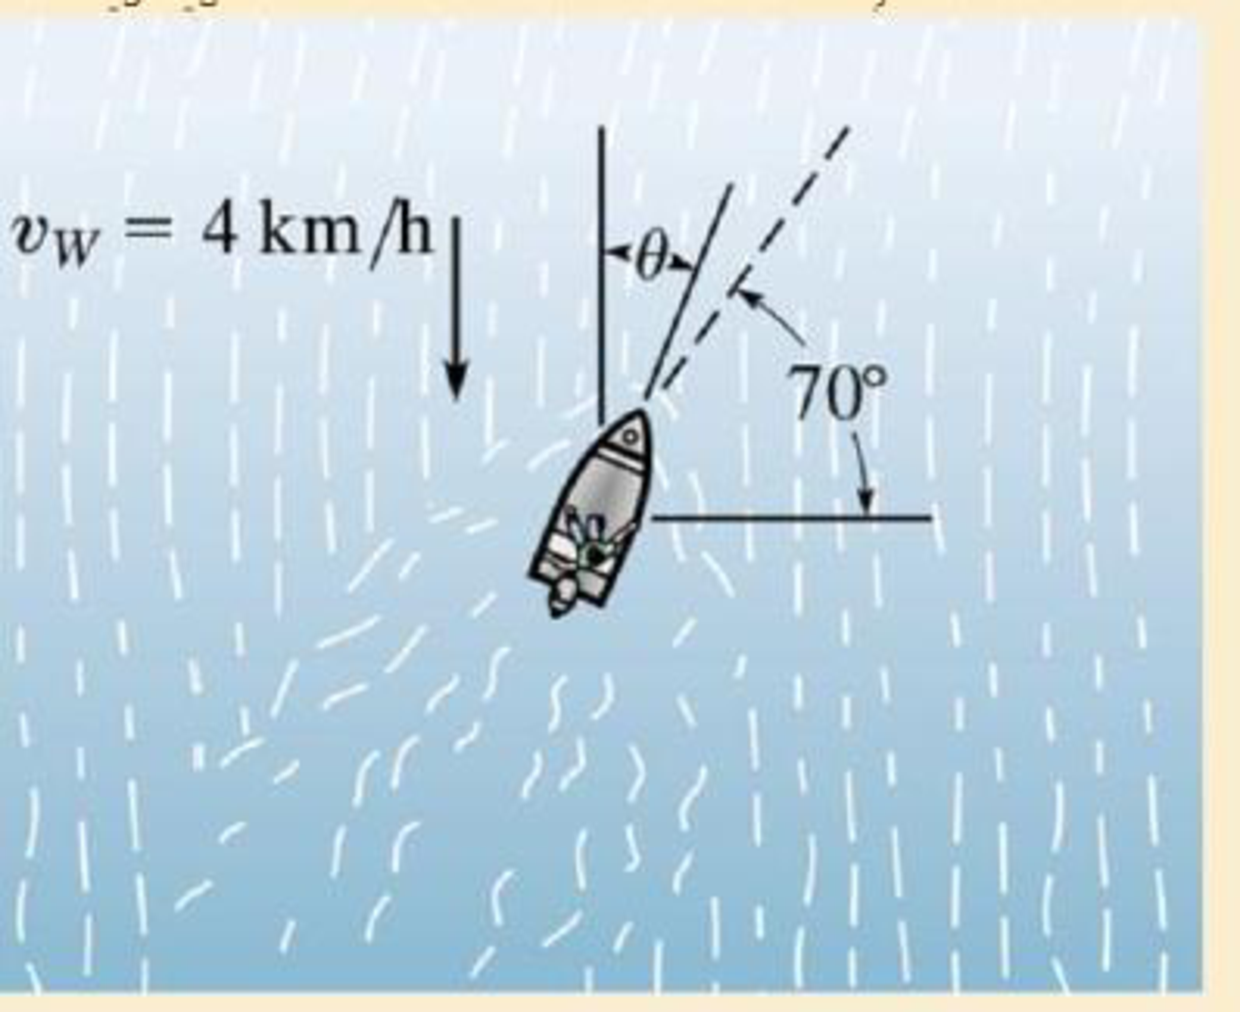 Chapter 12.10, Problem 220P, The point of destination is located along the dashed line. If the water is moving at 4 km/h, 